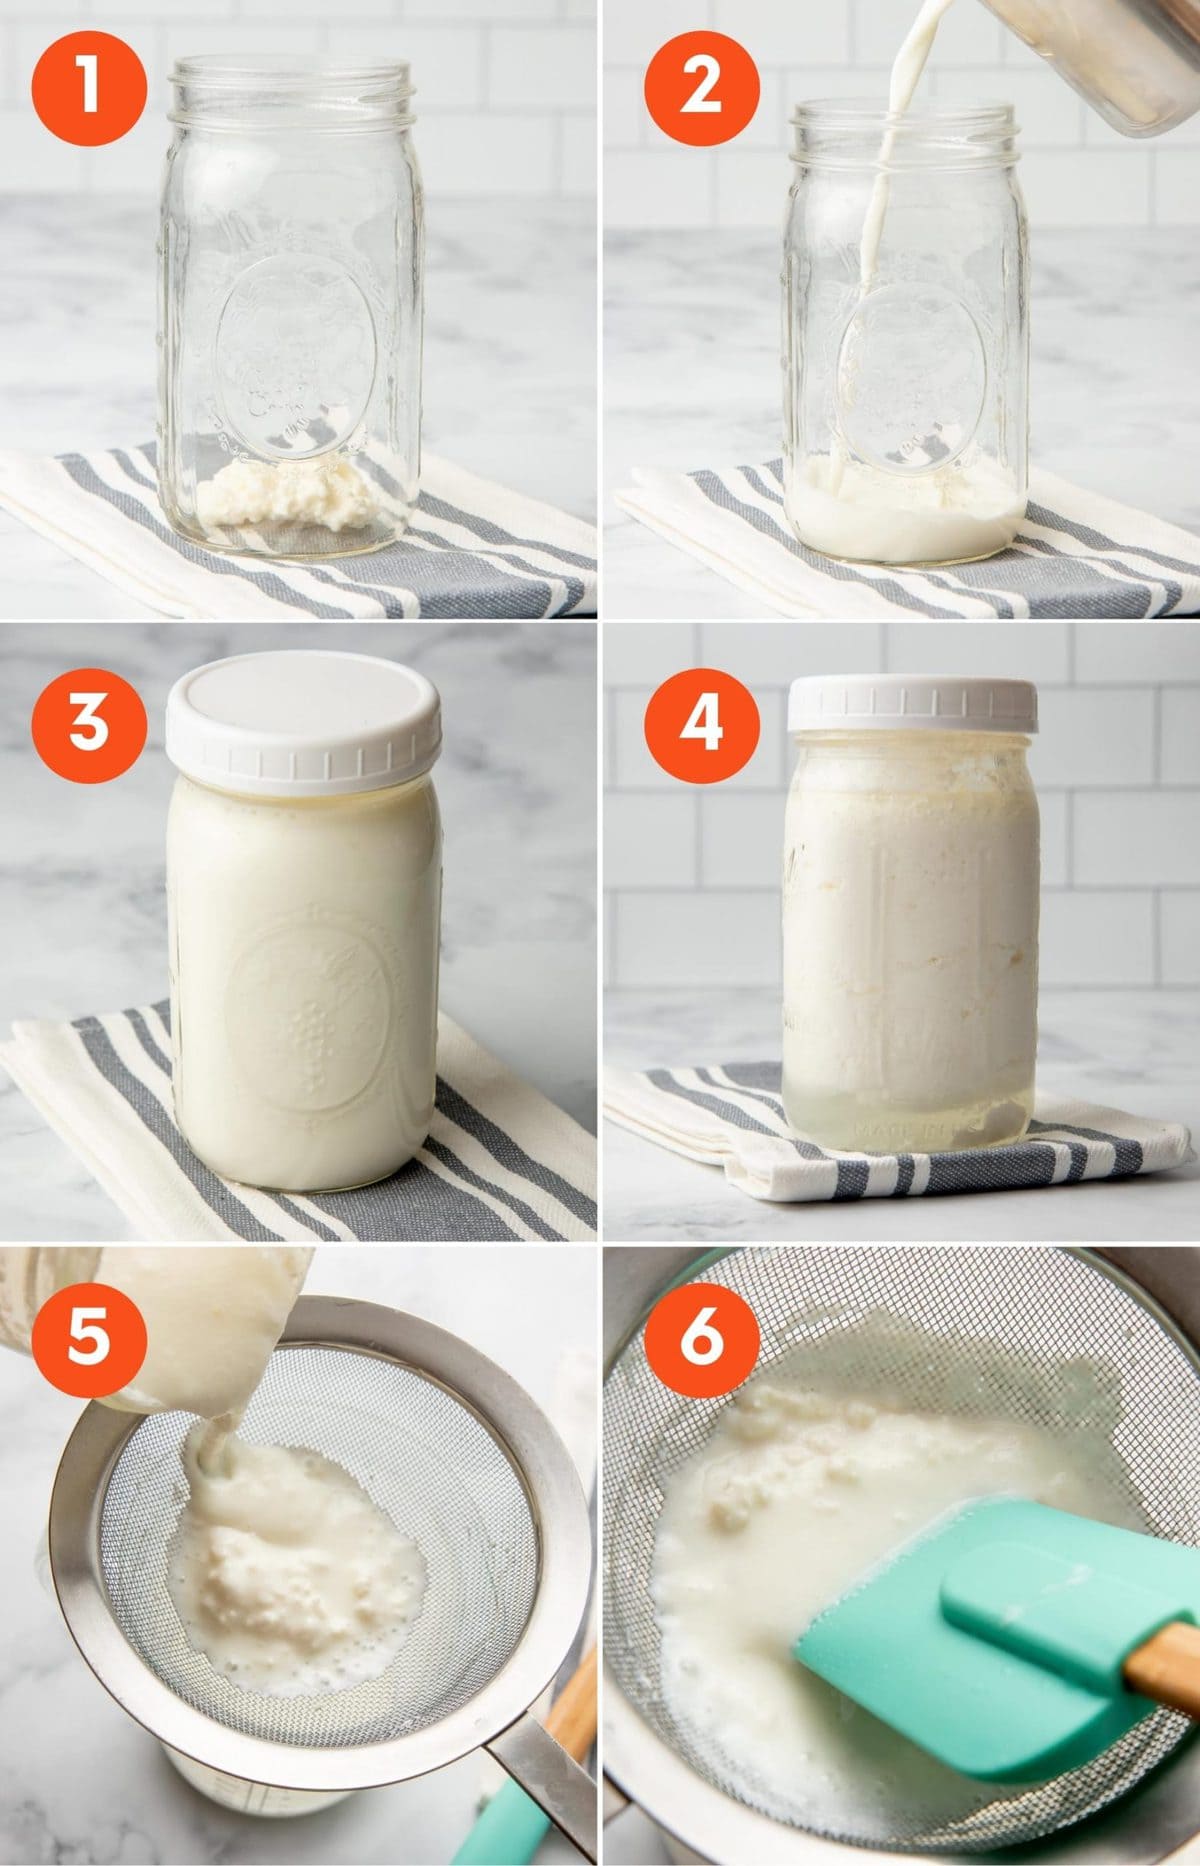 Collage of images showing how to make kefir in six steps.